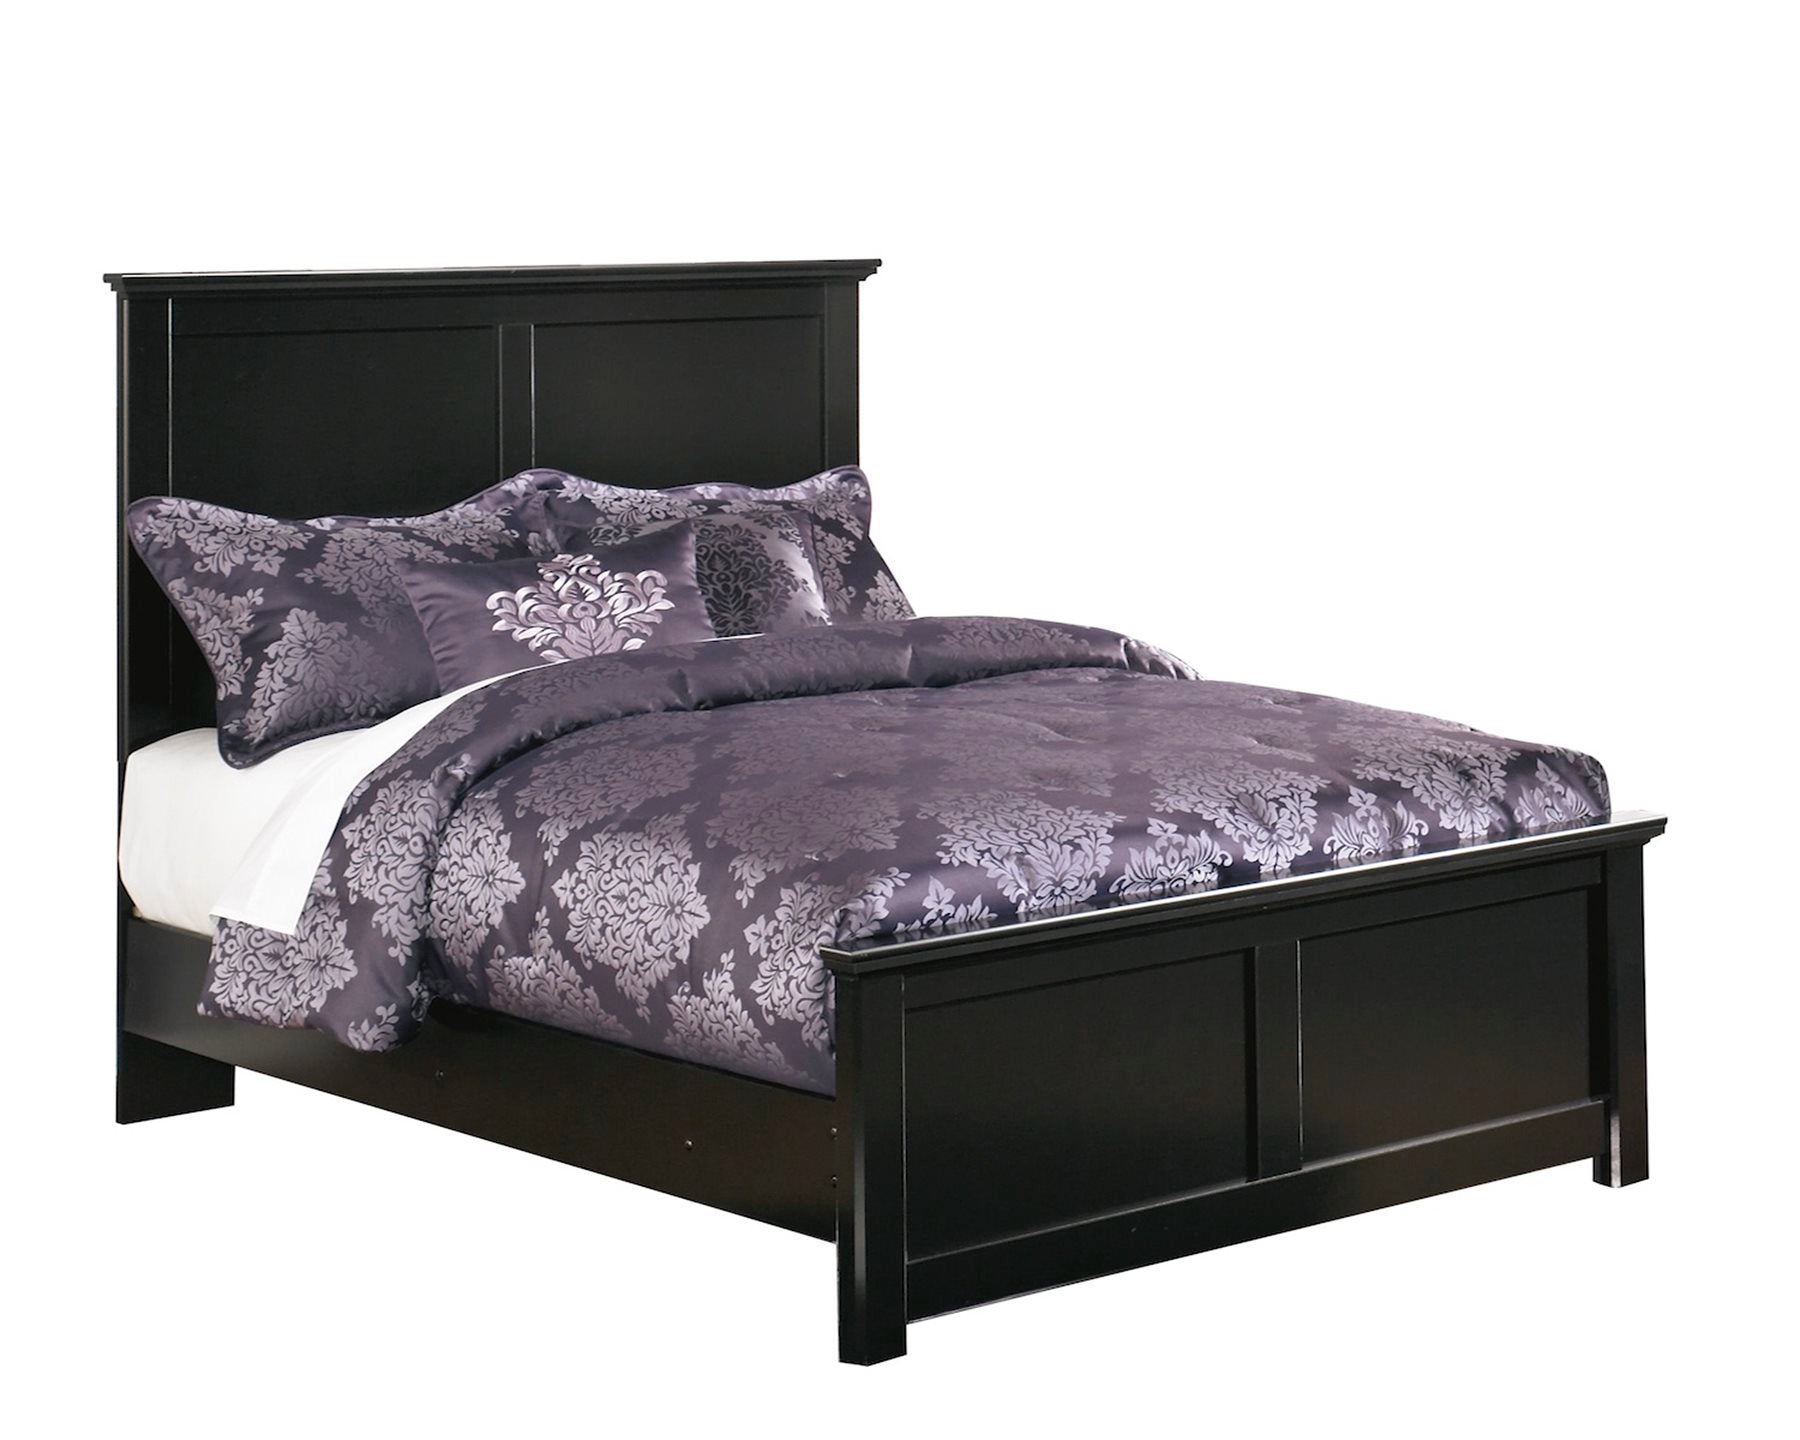 Ashley Maribel  5 PC Full Panel Headboard Bedroom Set with Chest in Black - The Furniture Space.